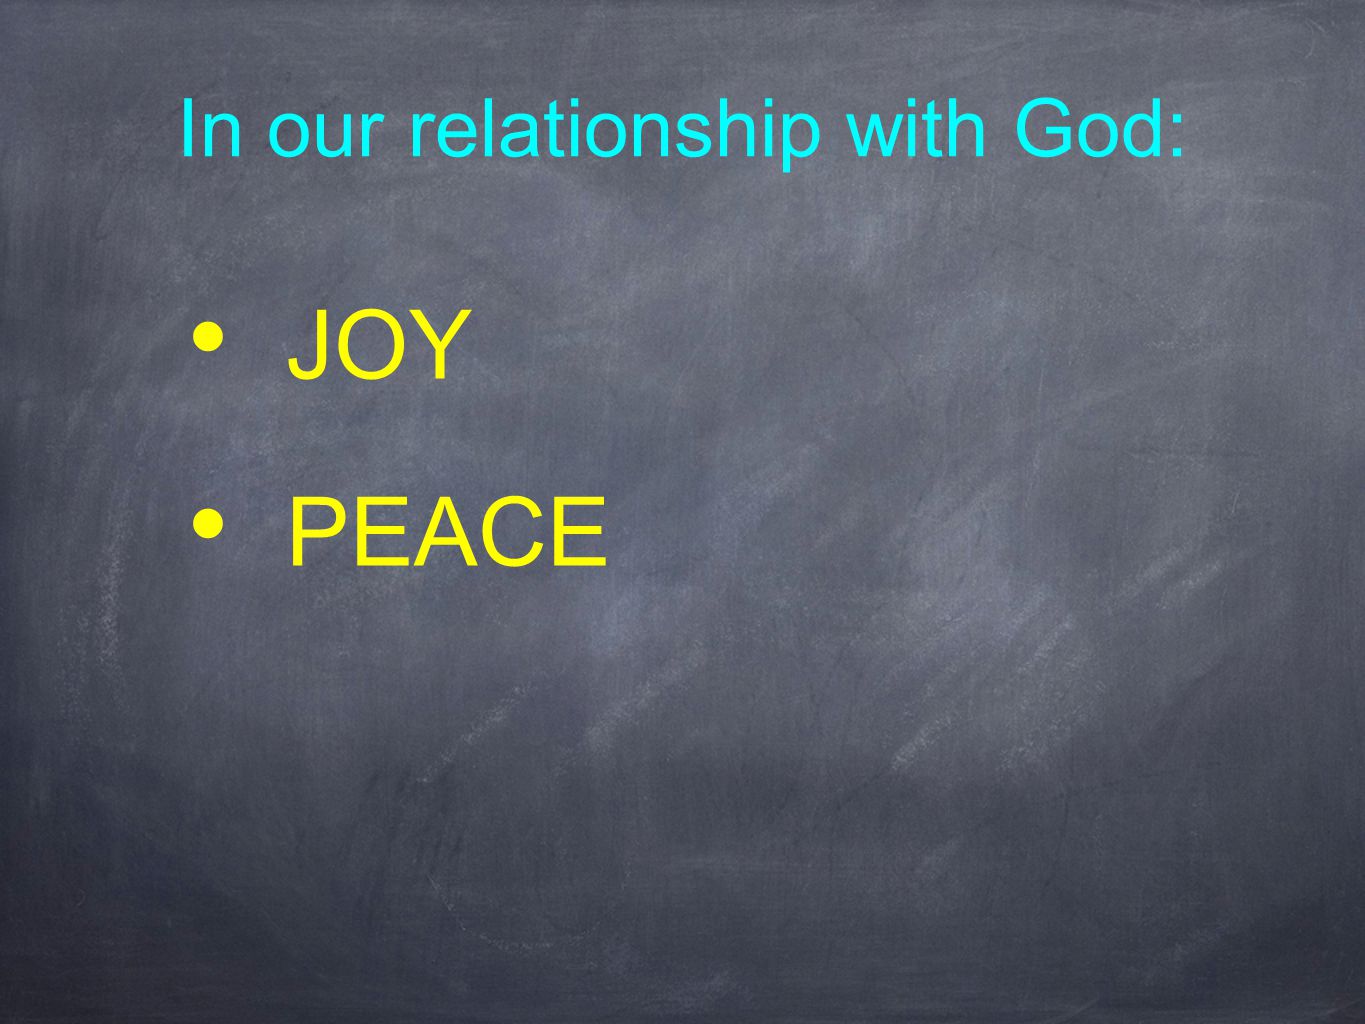 In our relationship with God: JOY PEACE